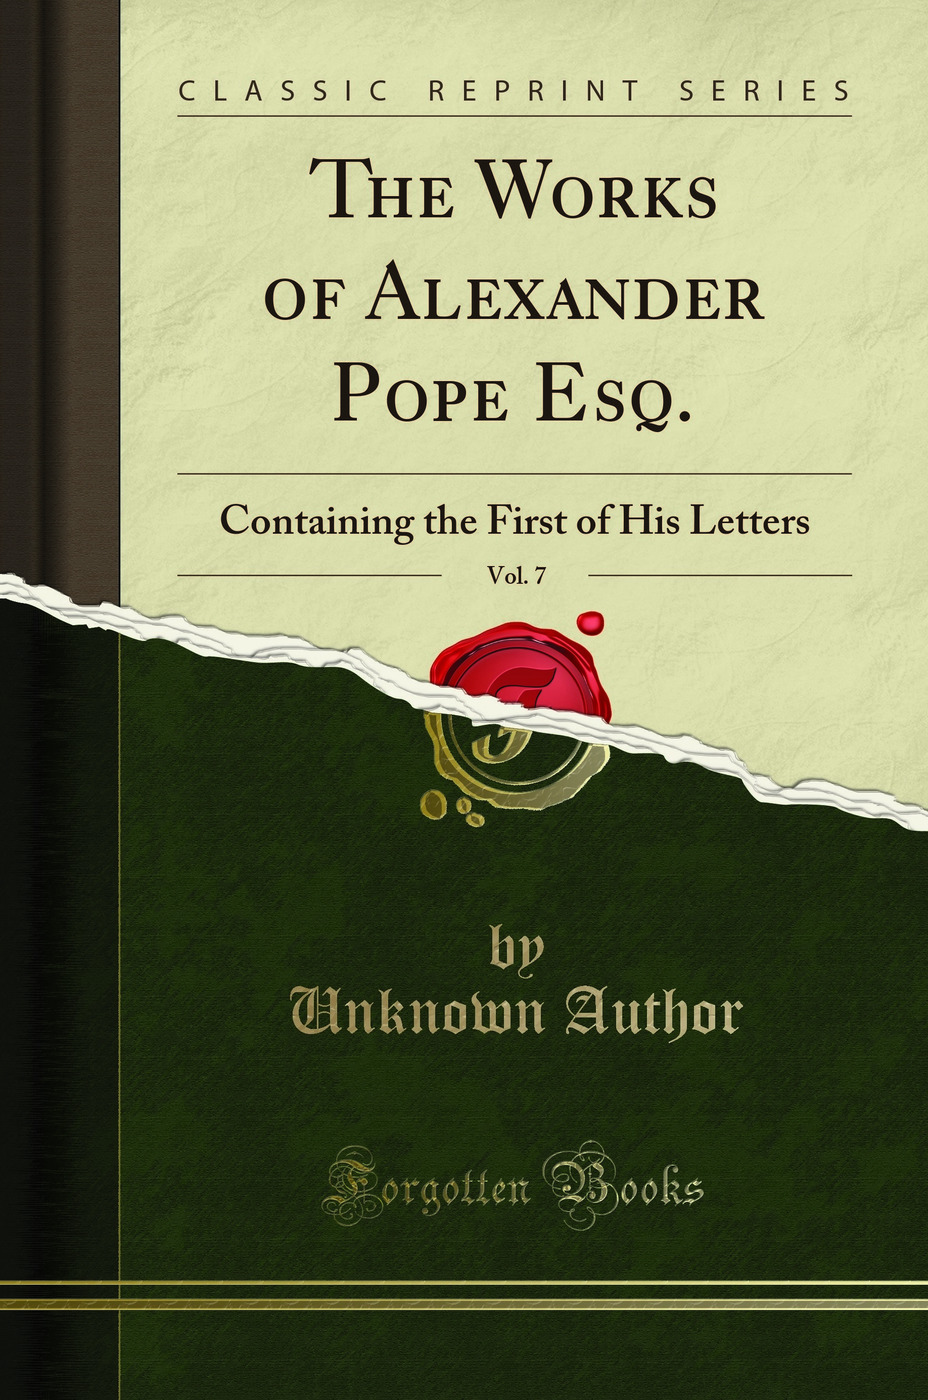 The Works of Alexander Pope Esq., Vol. 7: Containing the First of His Letters - Unknown Author